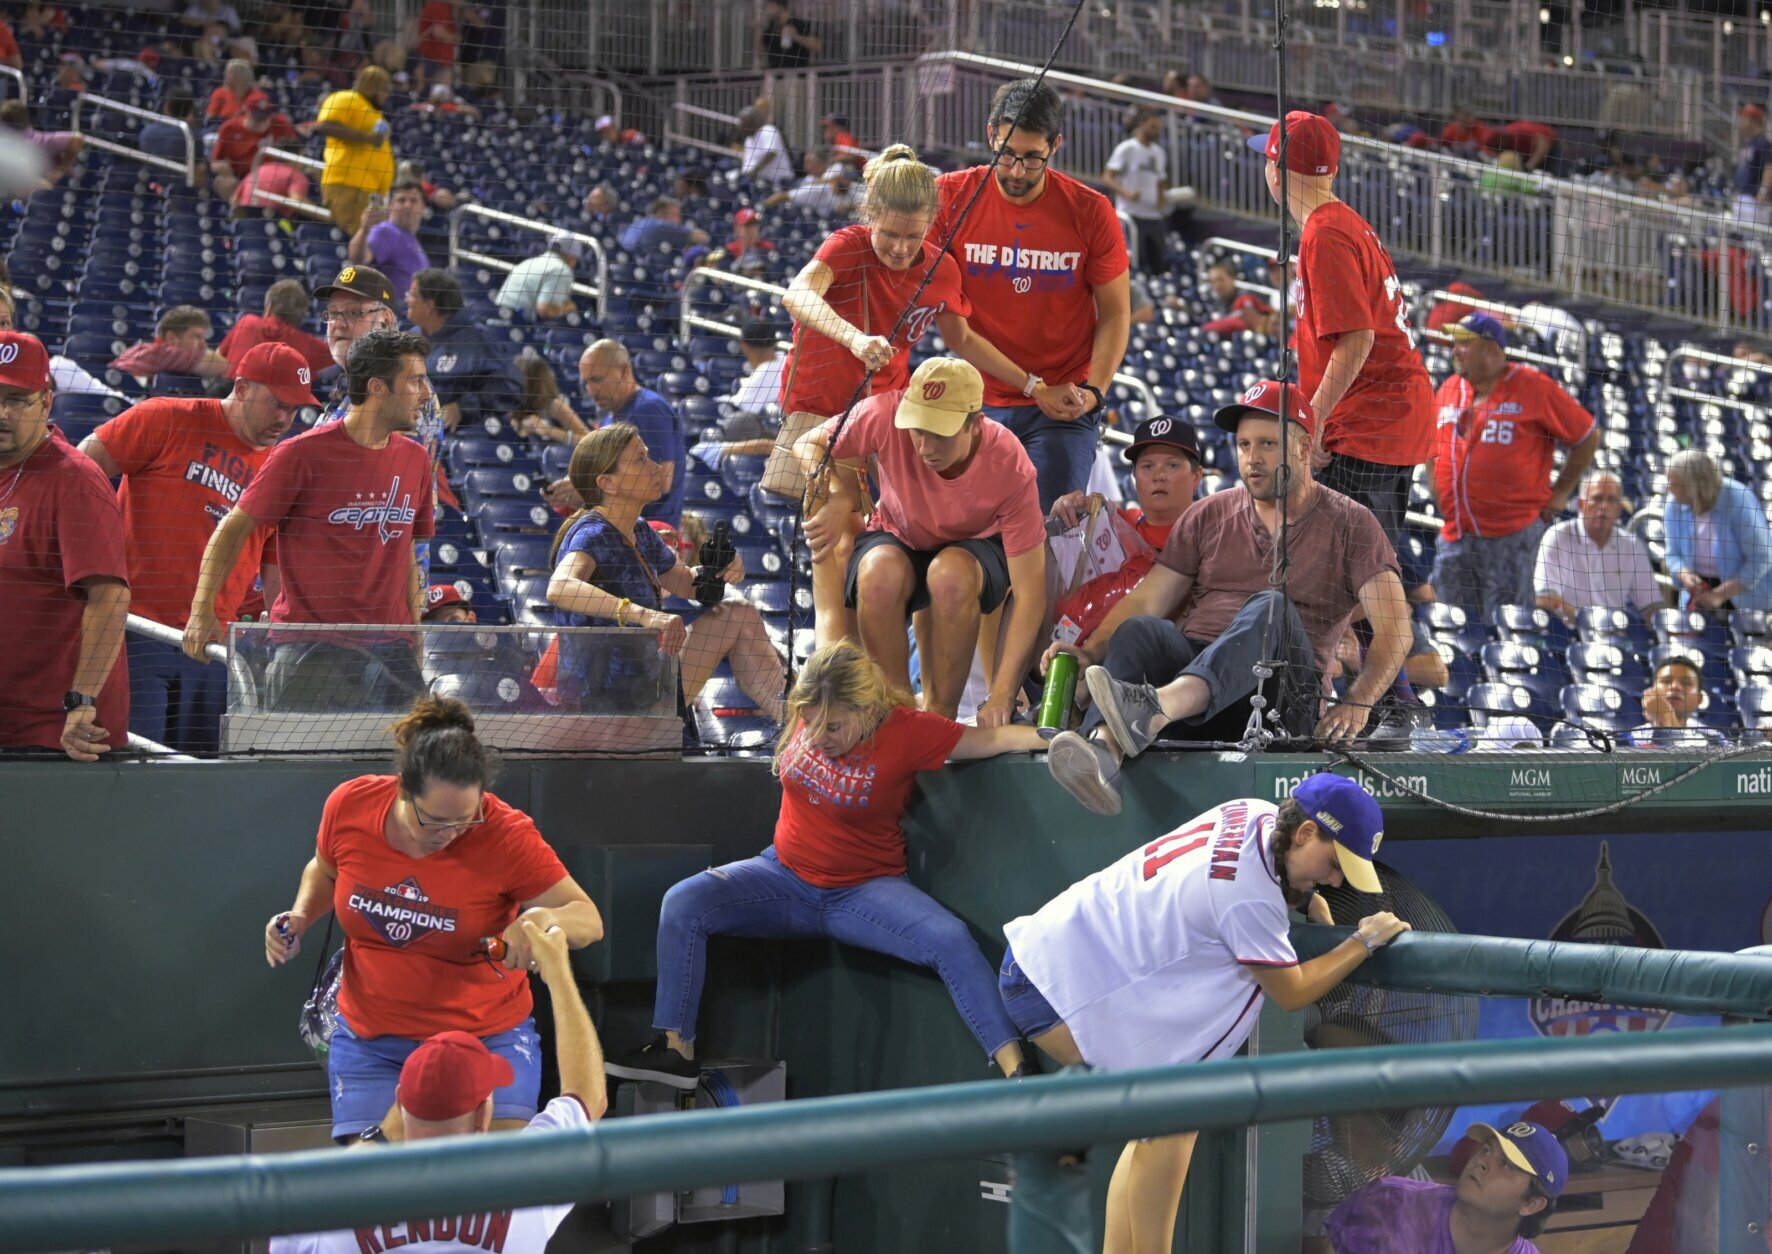 Fans jump into a camera well after hearing gunfire from outside the stadium, during a baseball game between the San Diego Padres and the Washington Nationals at Nationals Park in Washington on Saturday, July 17, 2021. (John McDonnell/The Washington Post via AP)